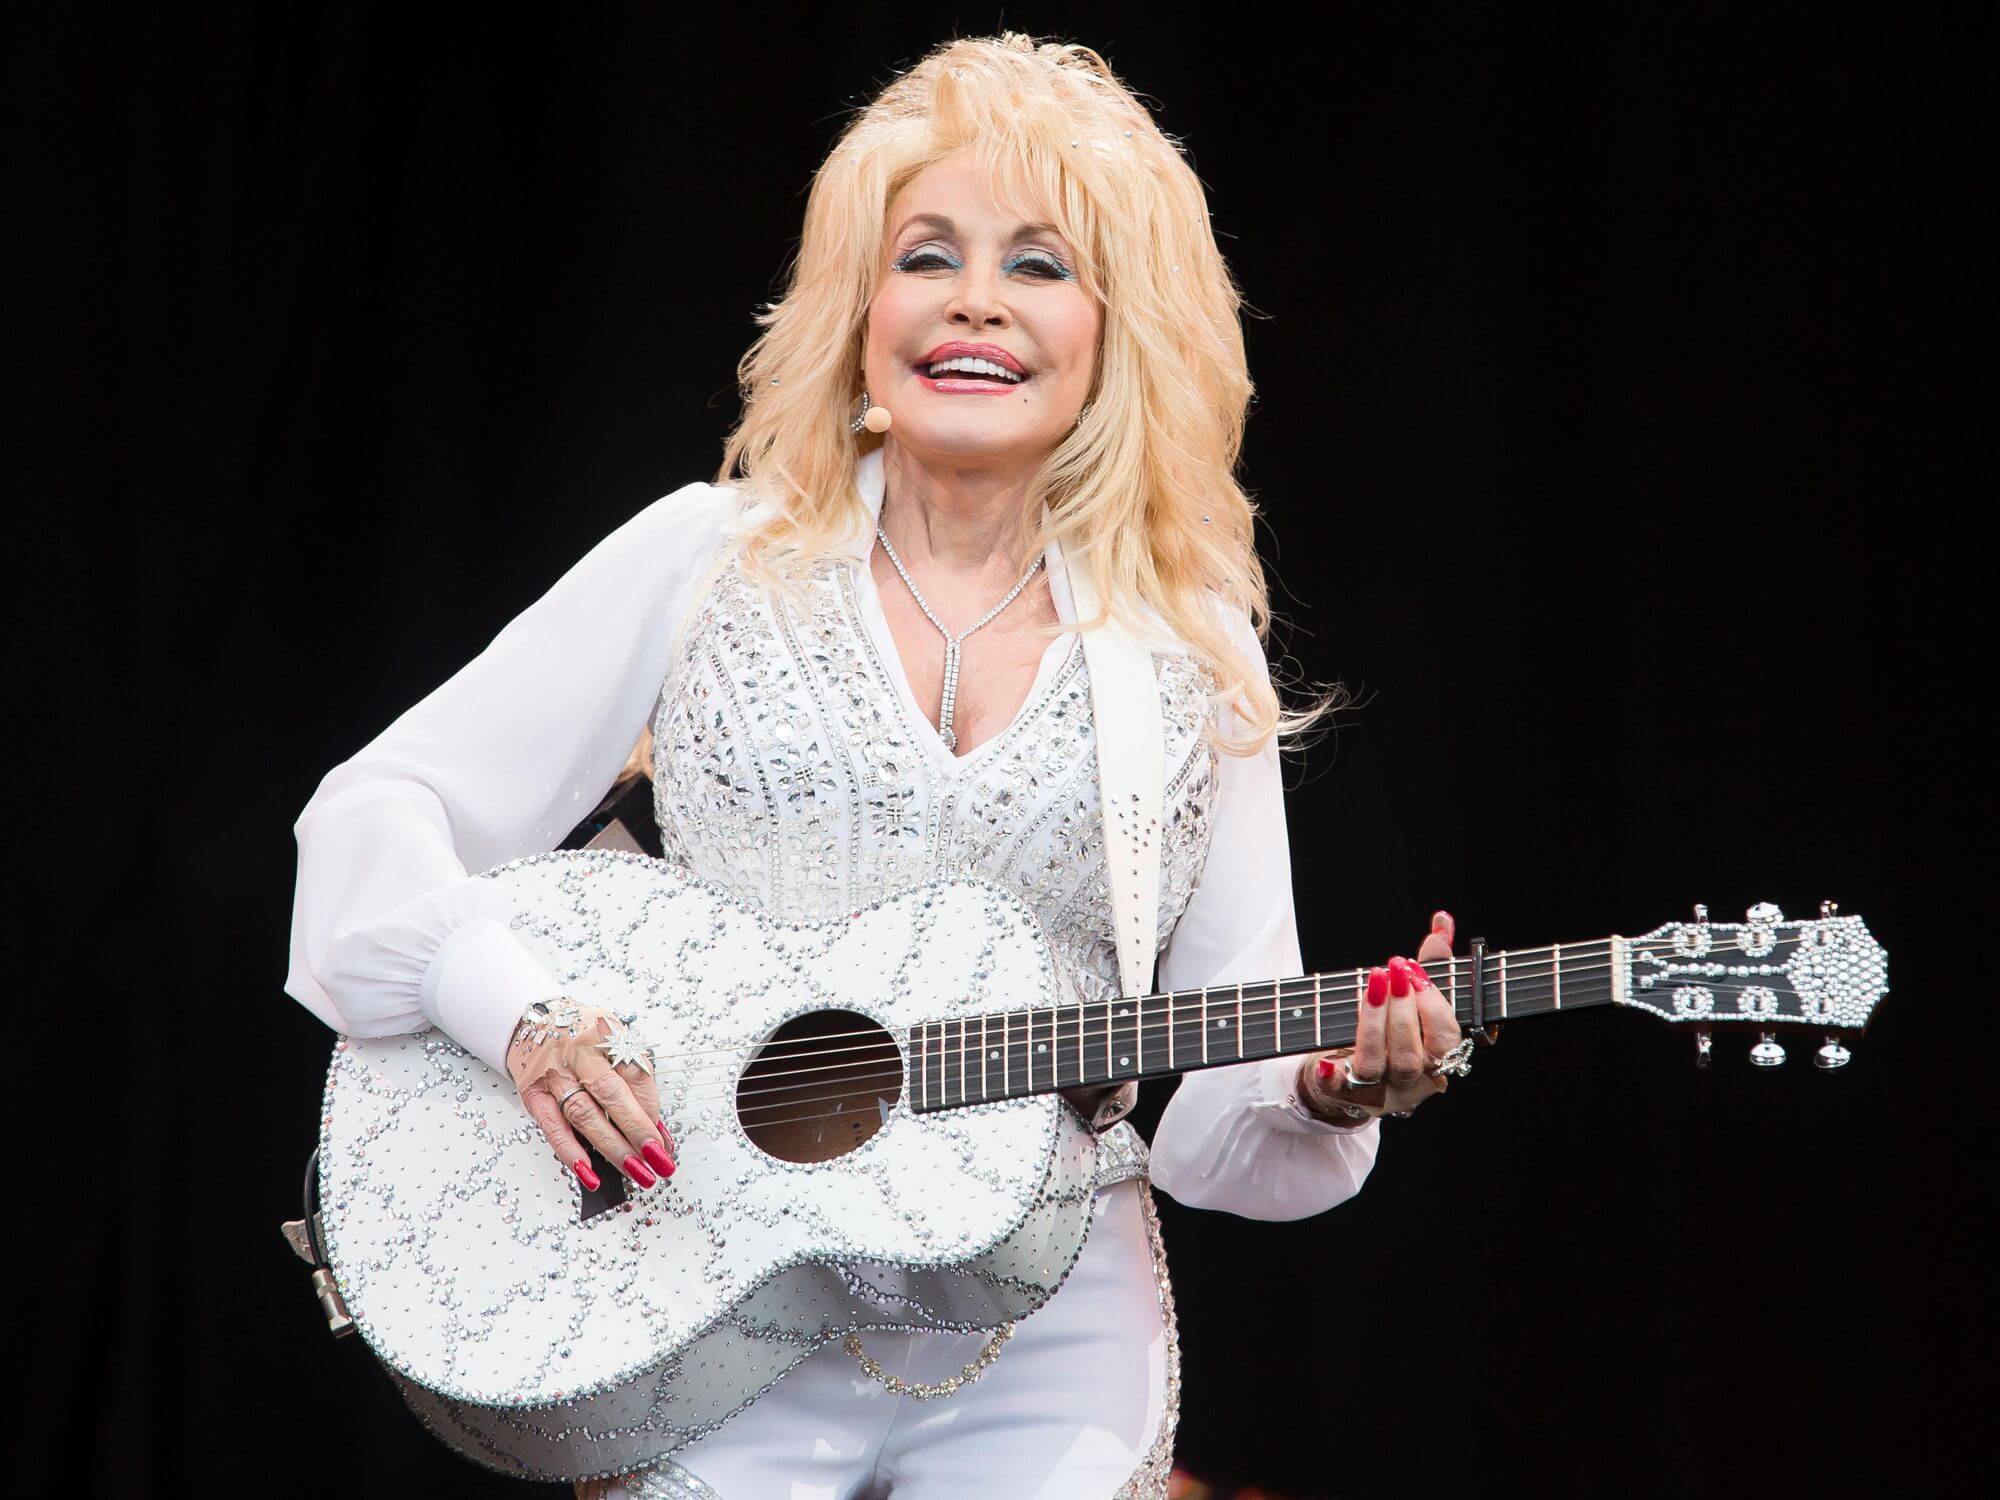 Dolly Parton wearing a white outfit and guitar